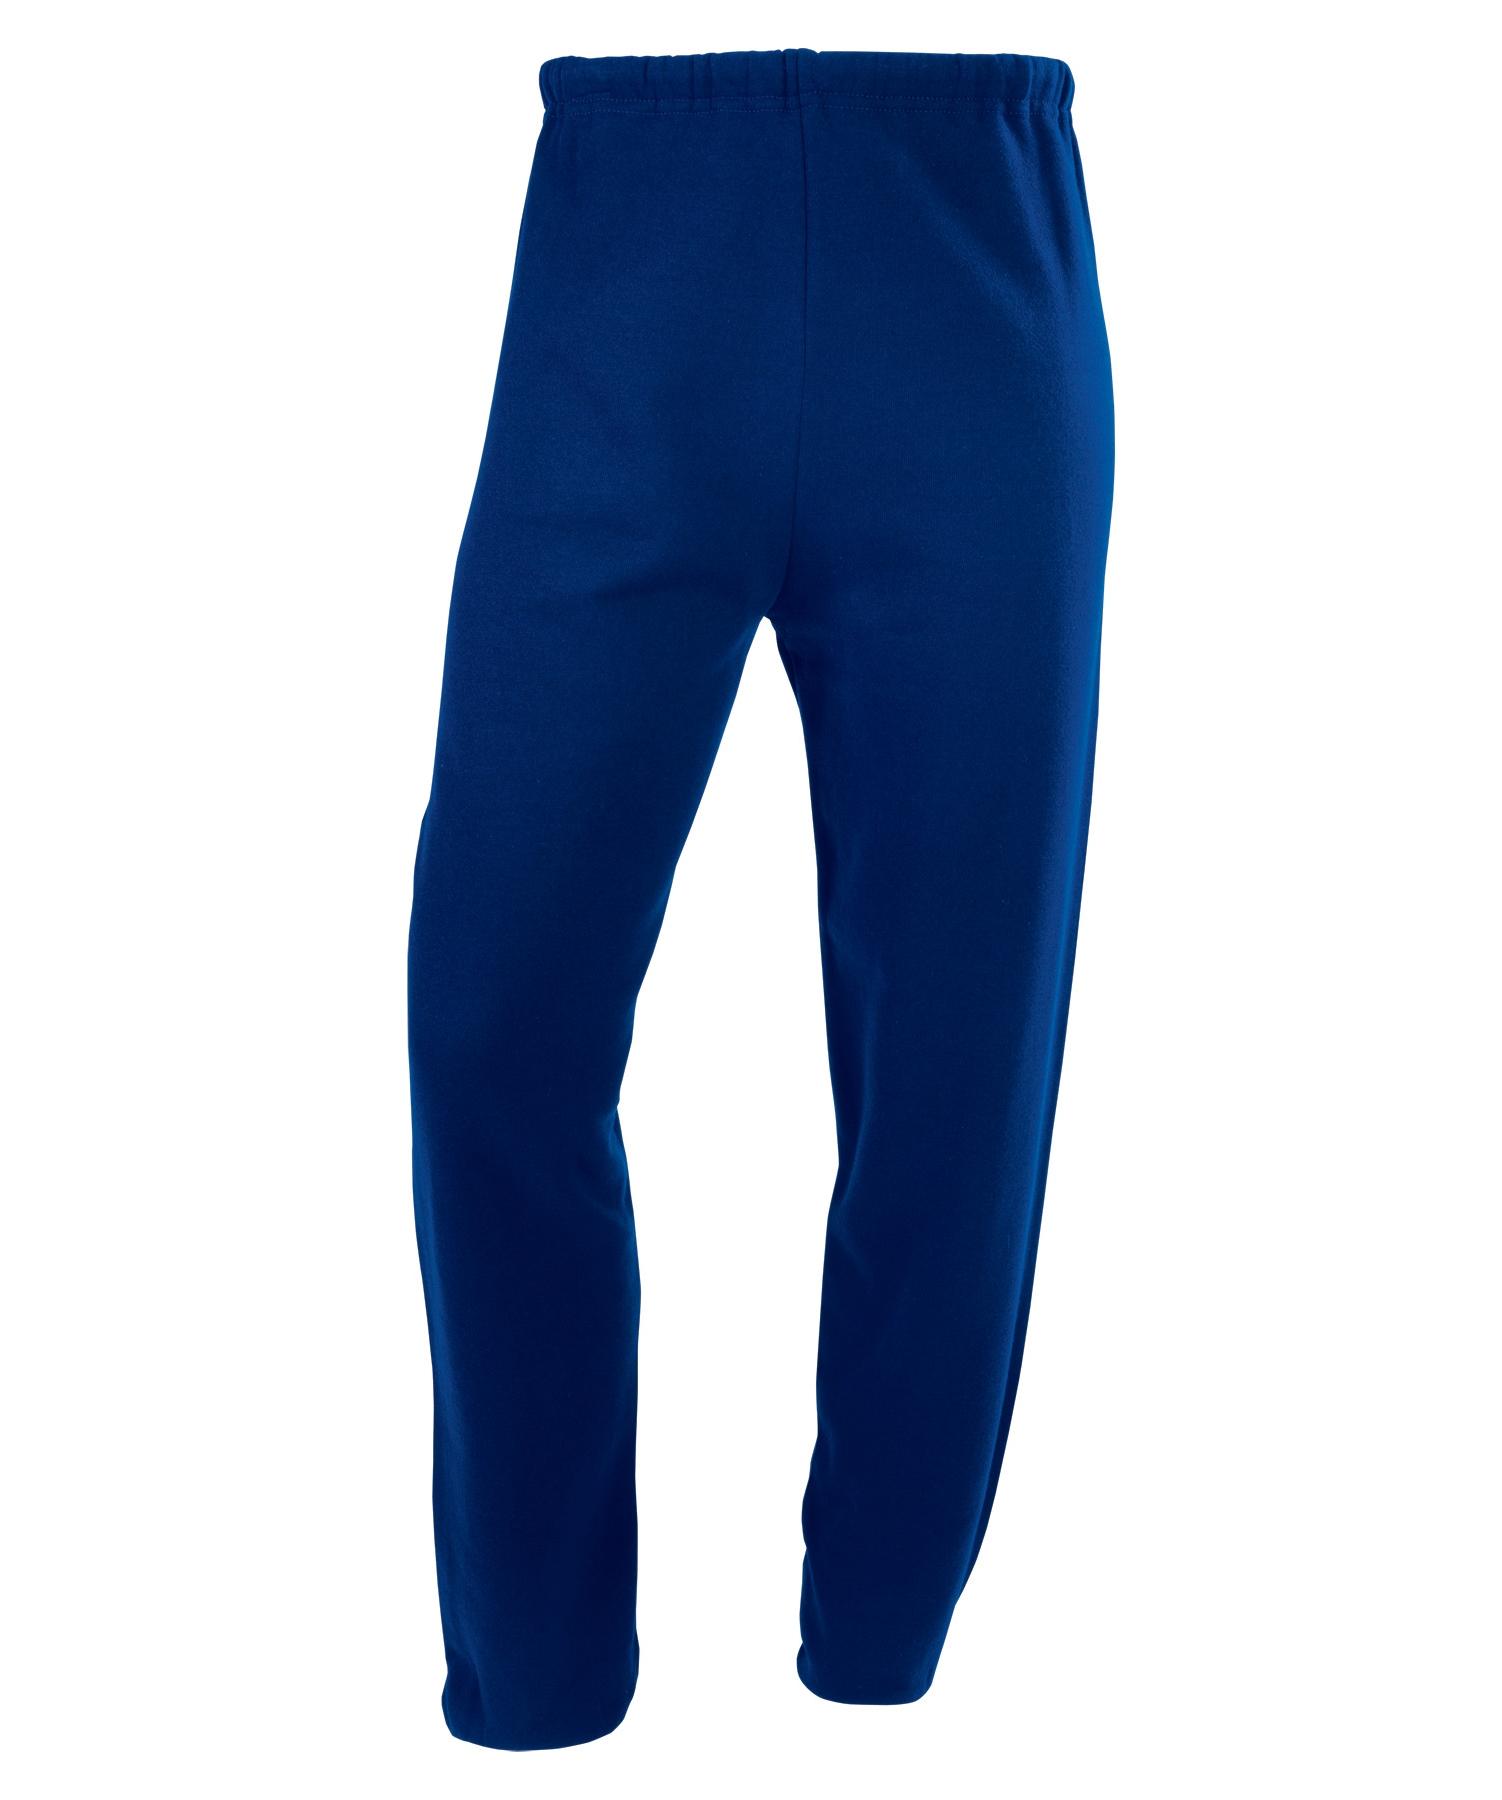 Russell Athletic Sweatpants Adult Unisex With Pocket and Elastic